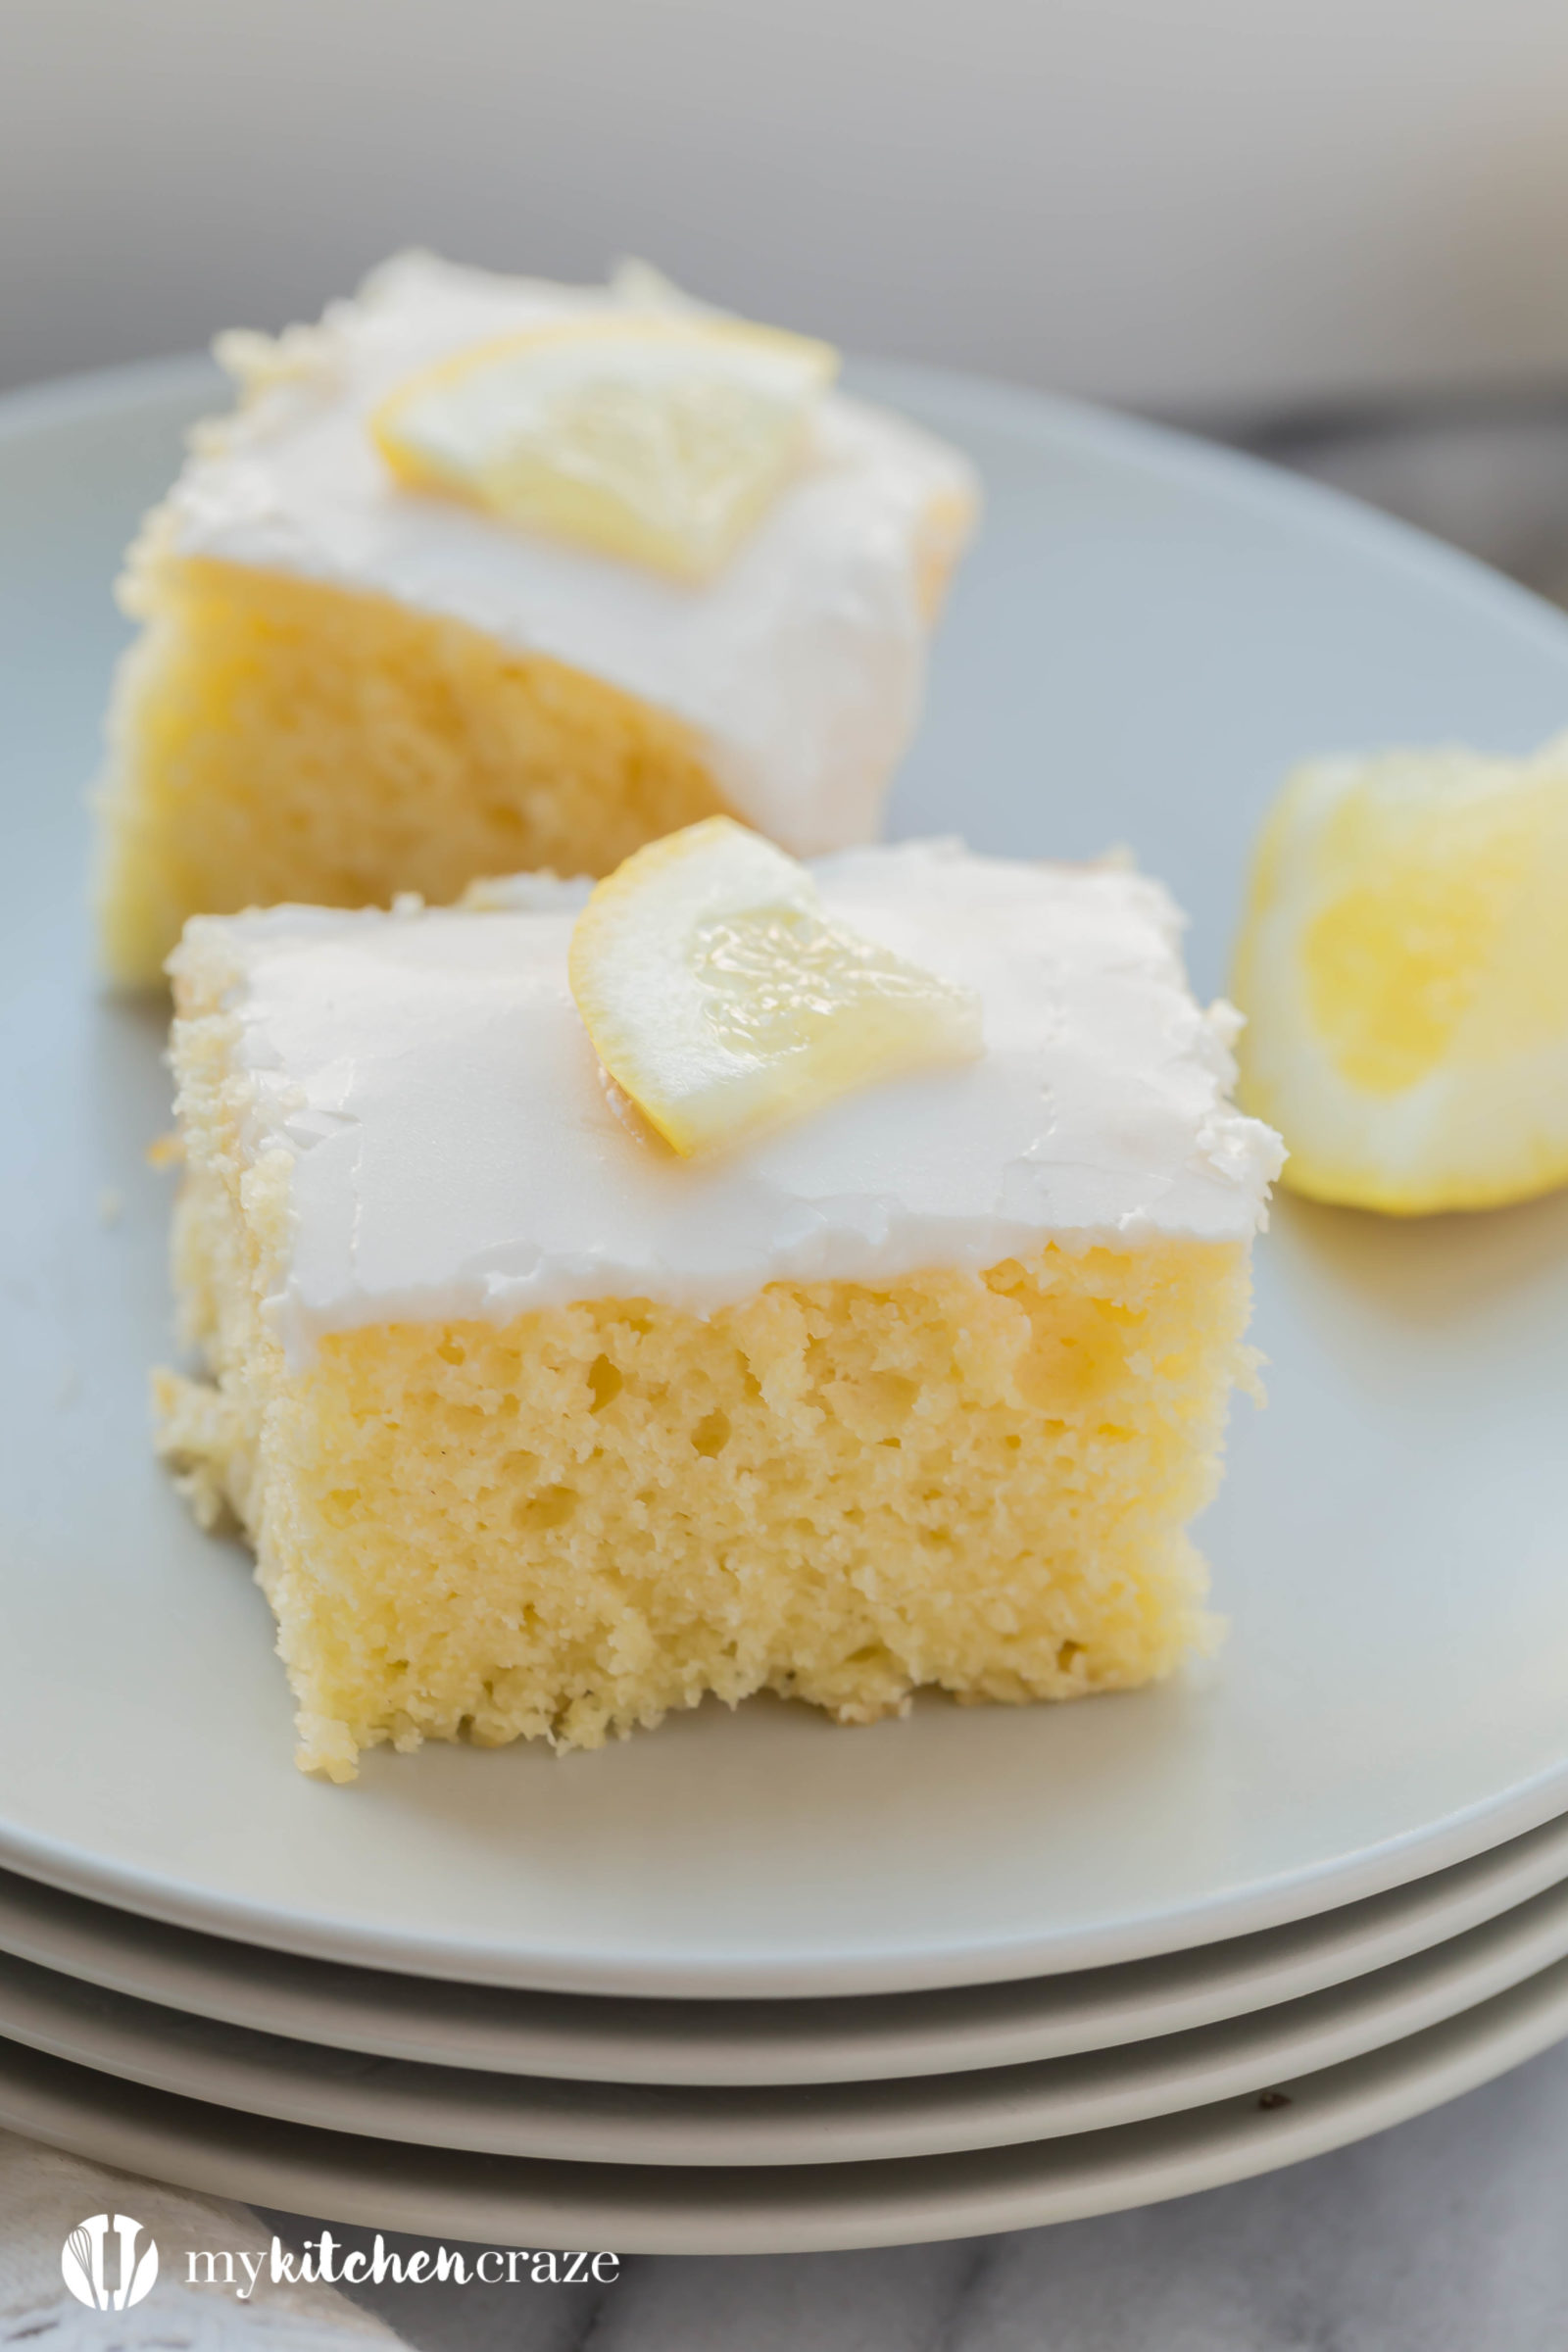 Lemon Velvet Squares are moist and packed with lemon flavor. Topped with a simple lemon glaze, these are one dessert you won't want to pass up. Includes a how to make video too.